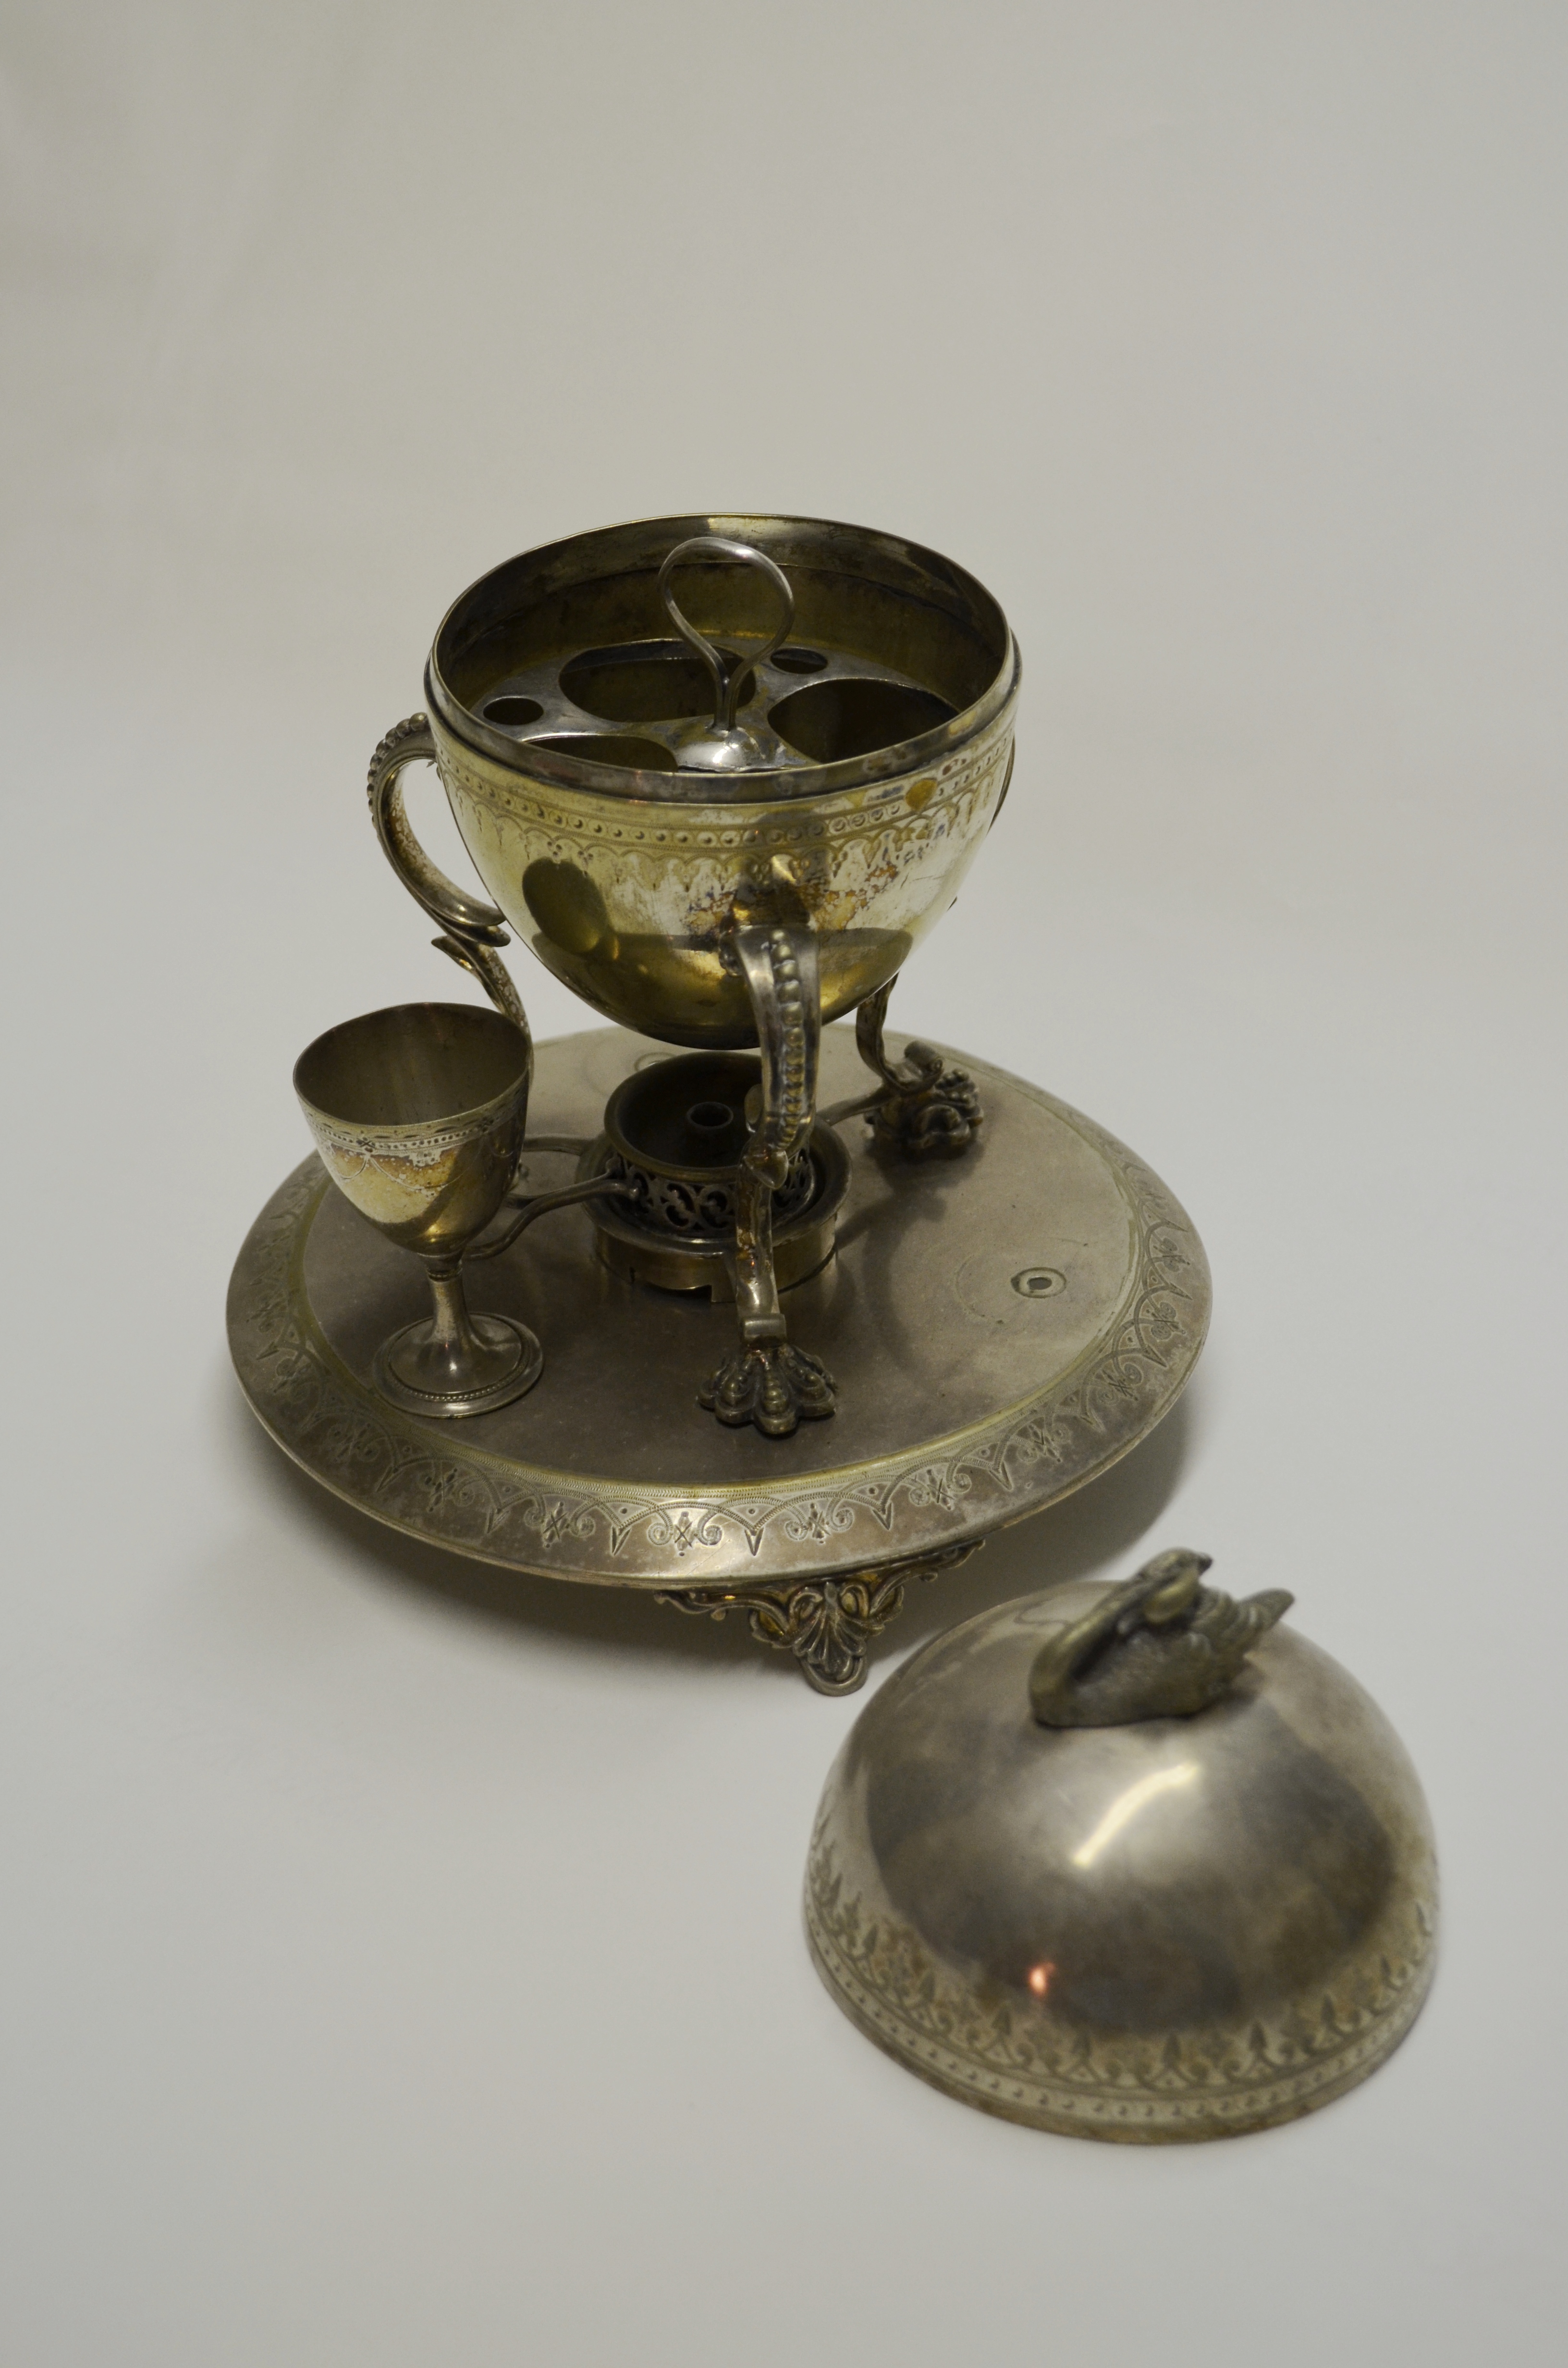 Egg warmer from Rouse Hill House & Farm showing the internal compartment. Hamilton Rouse Hill Trust Collection, Sydney Living Museums HR87/54-1:6